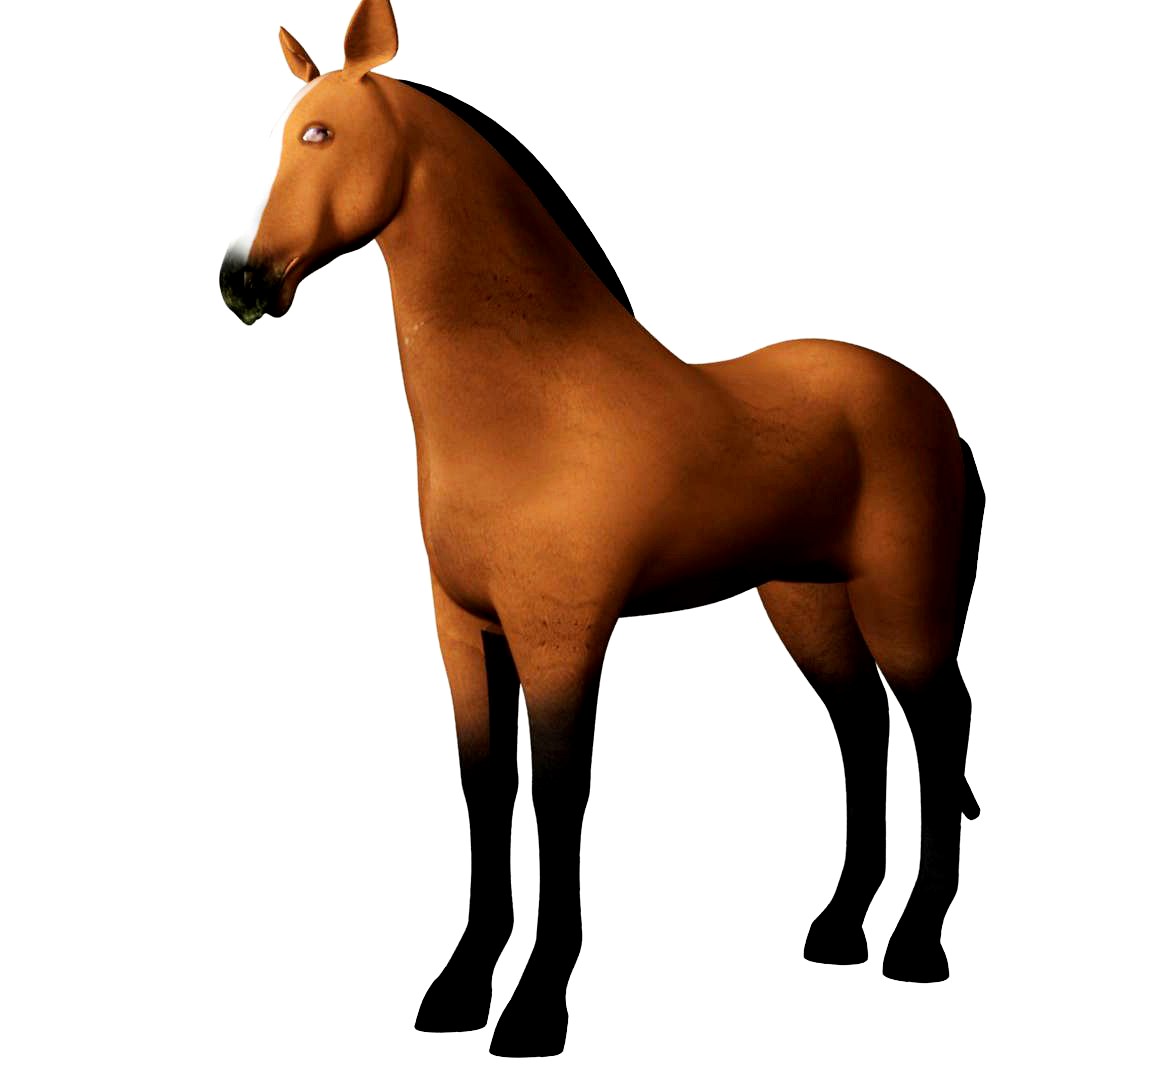 3D Horse Rigged and Animated